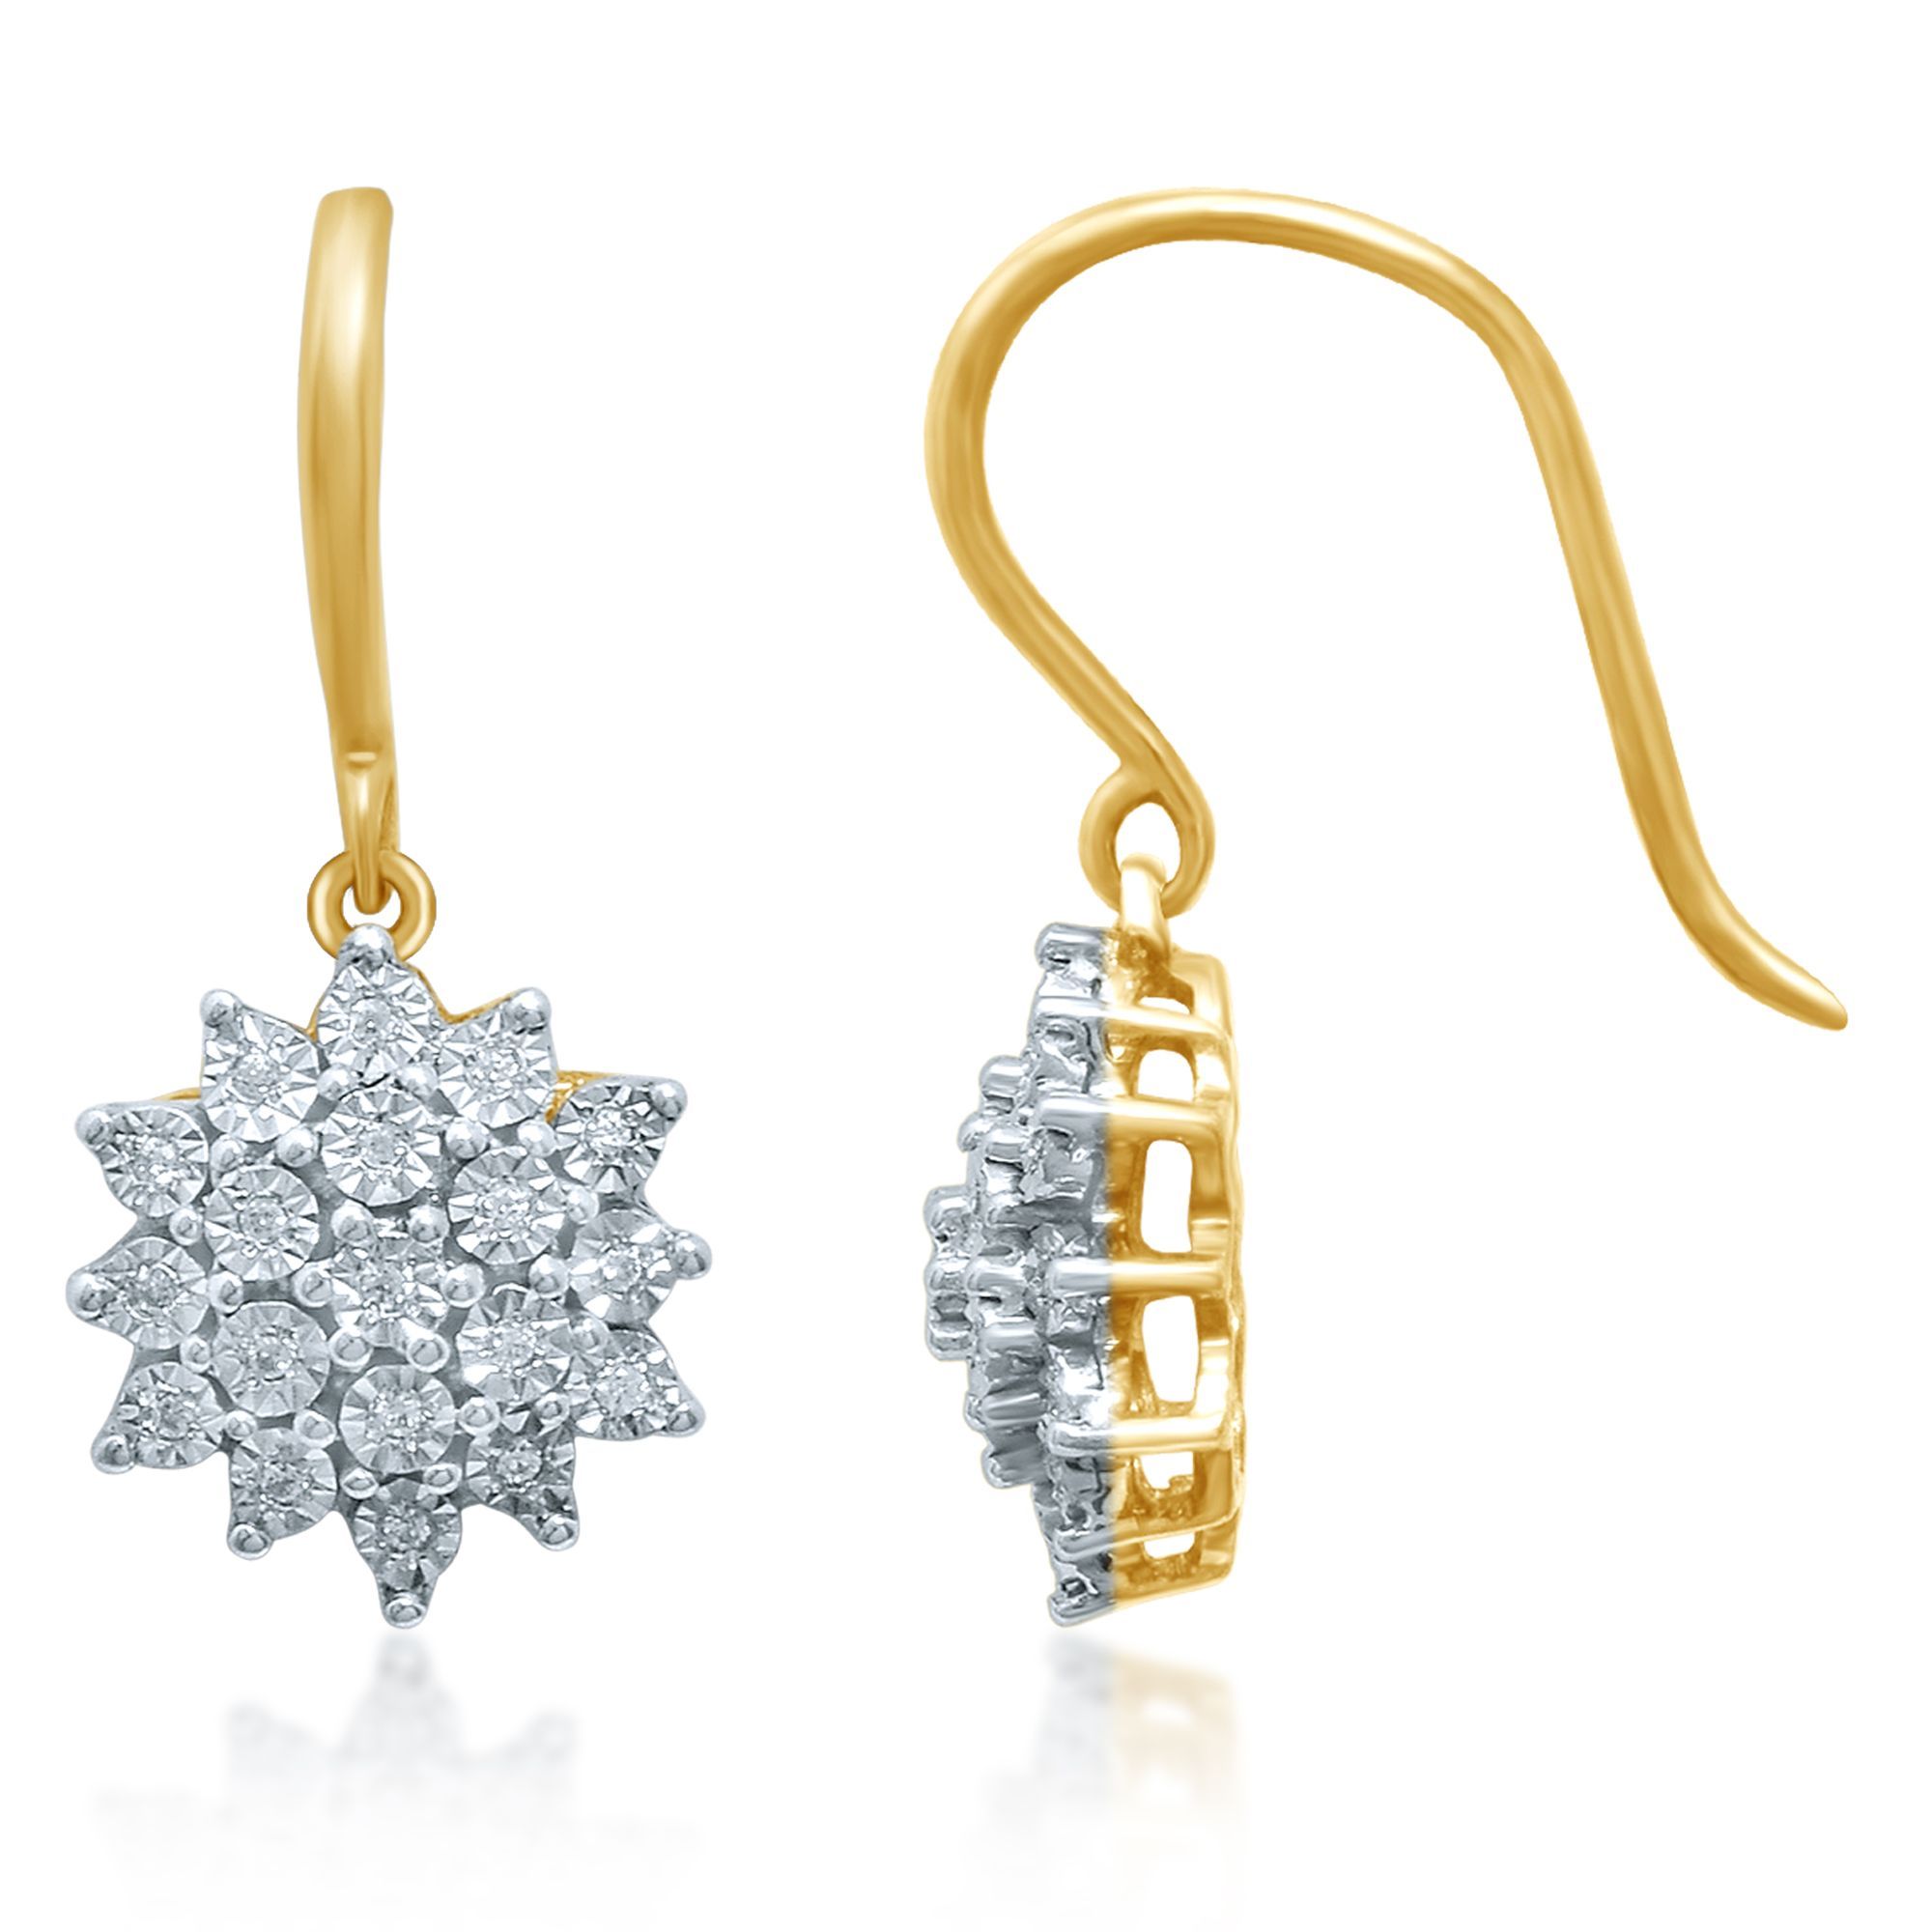 9ct Yellow Gold Flower Drop Earrings with 0.14ct of Diamonds Earrings Bevilles 